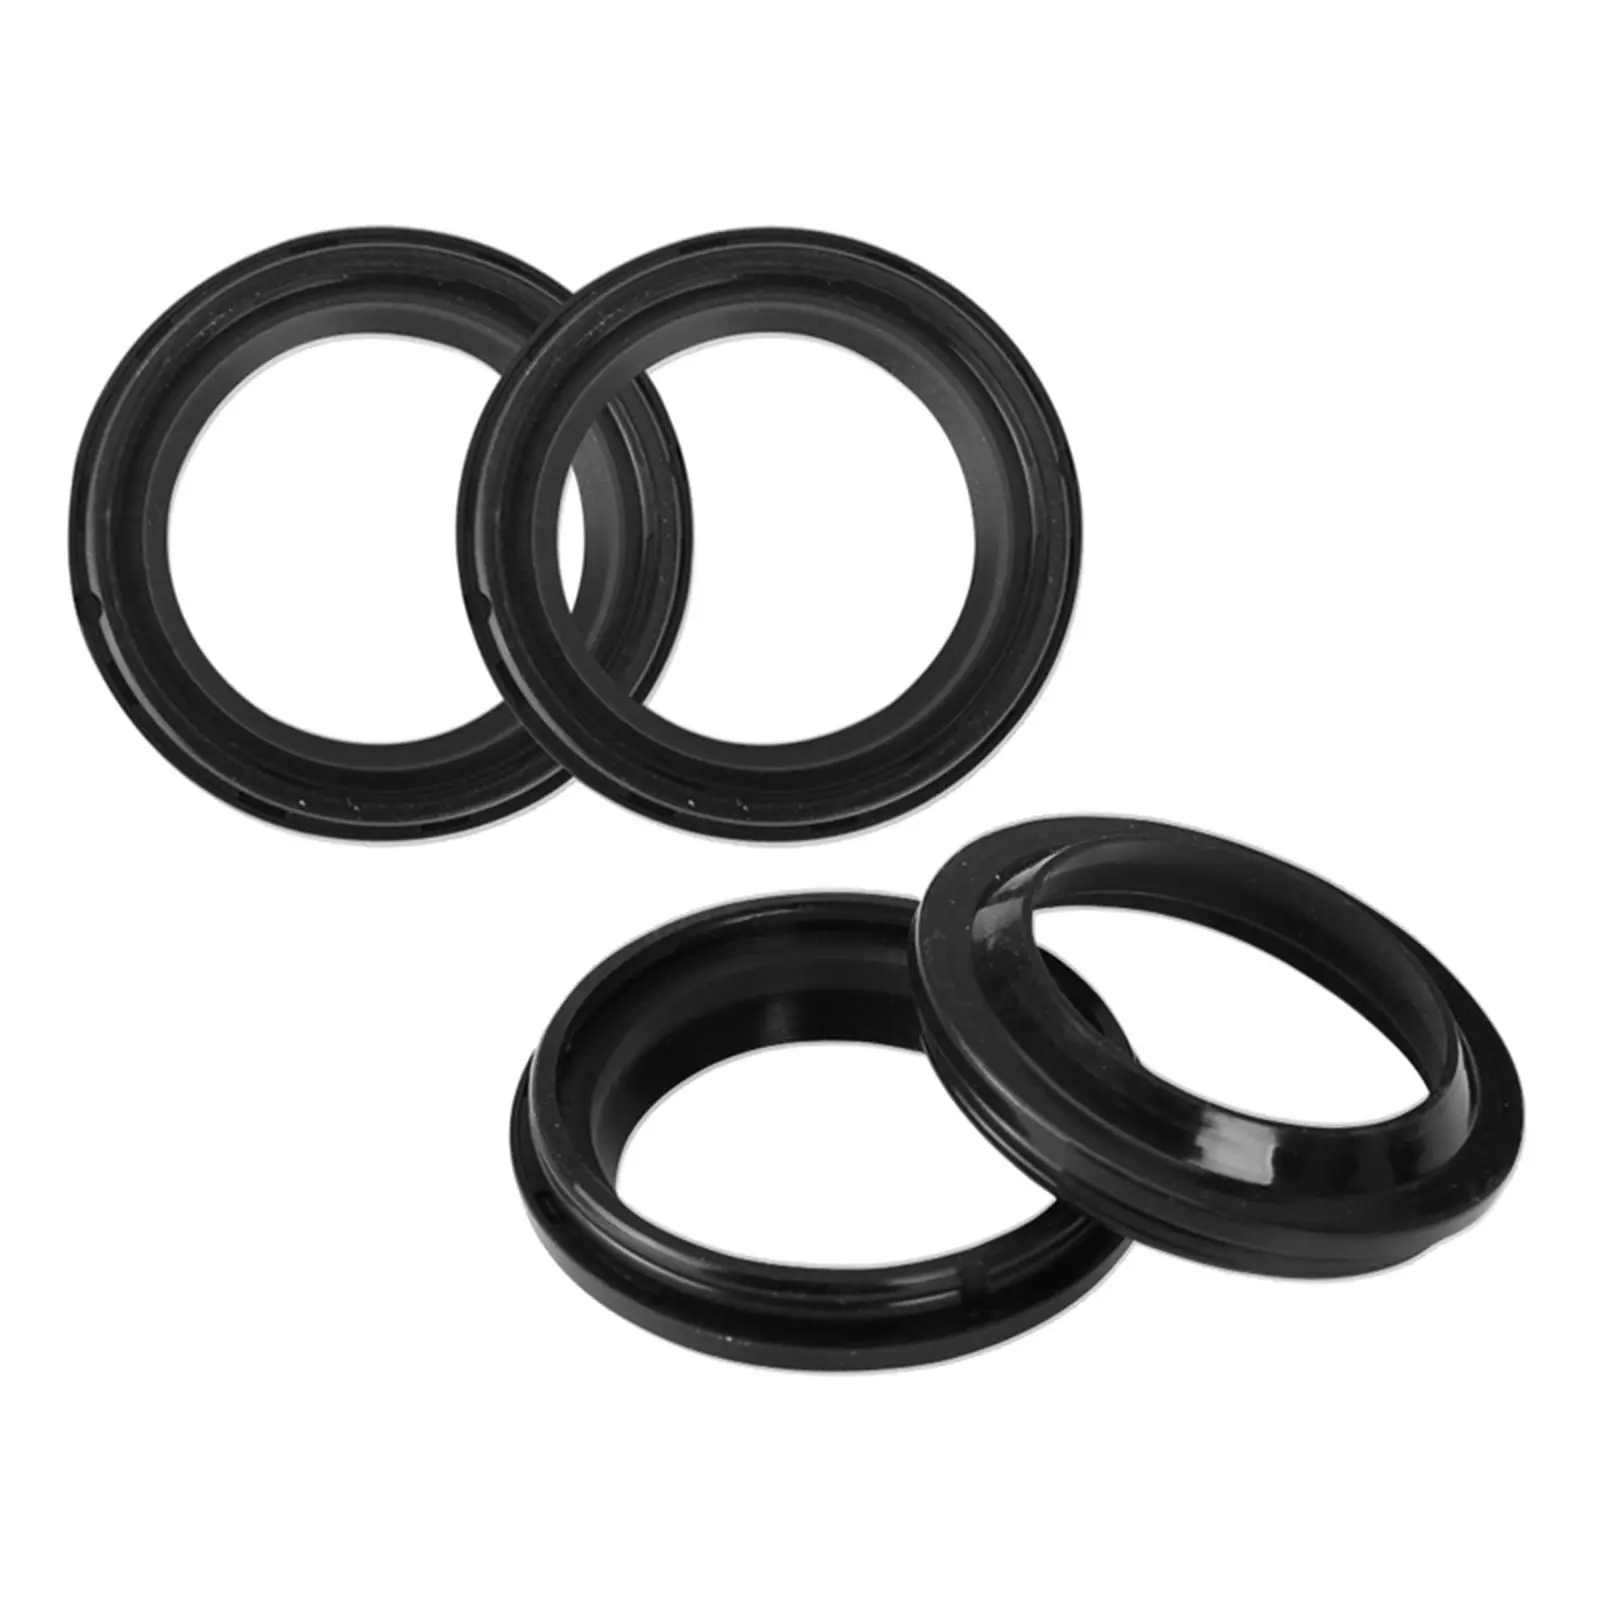 Front Fork Oil Seal and Dust Seal Set Kit 39x52x11mm for 3XV R1 Kawasaki  250 52X39-11